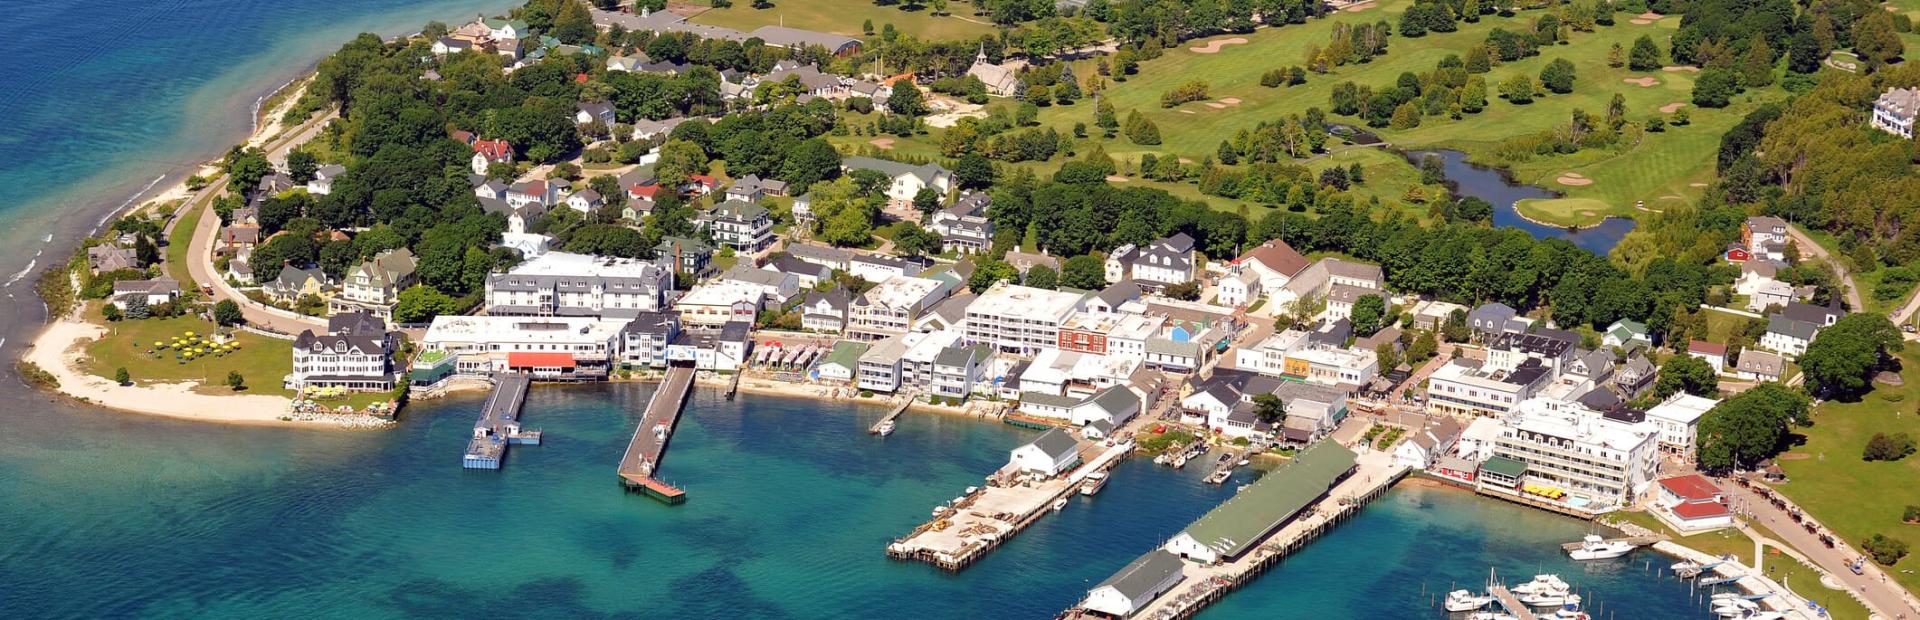 Aerial view of Grand Hotel and Downtown Mackinac